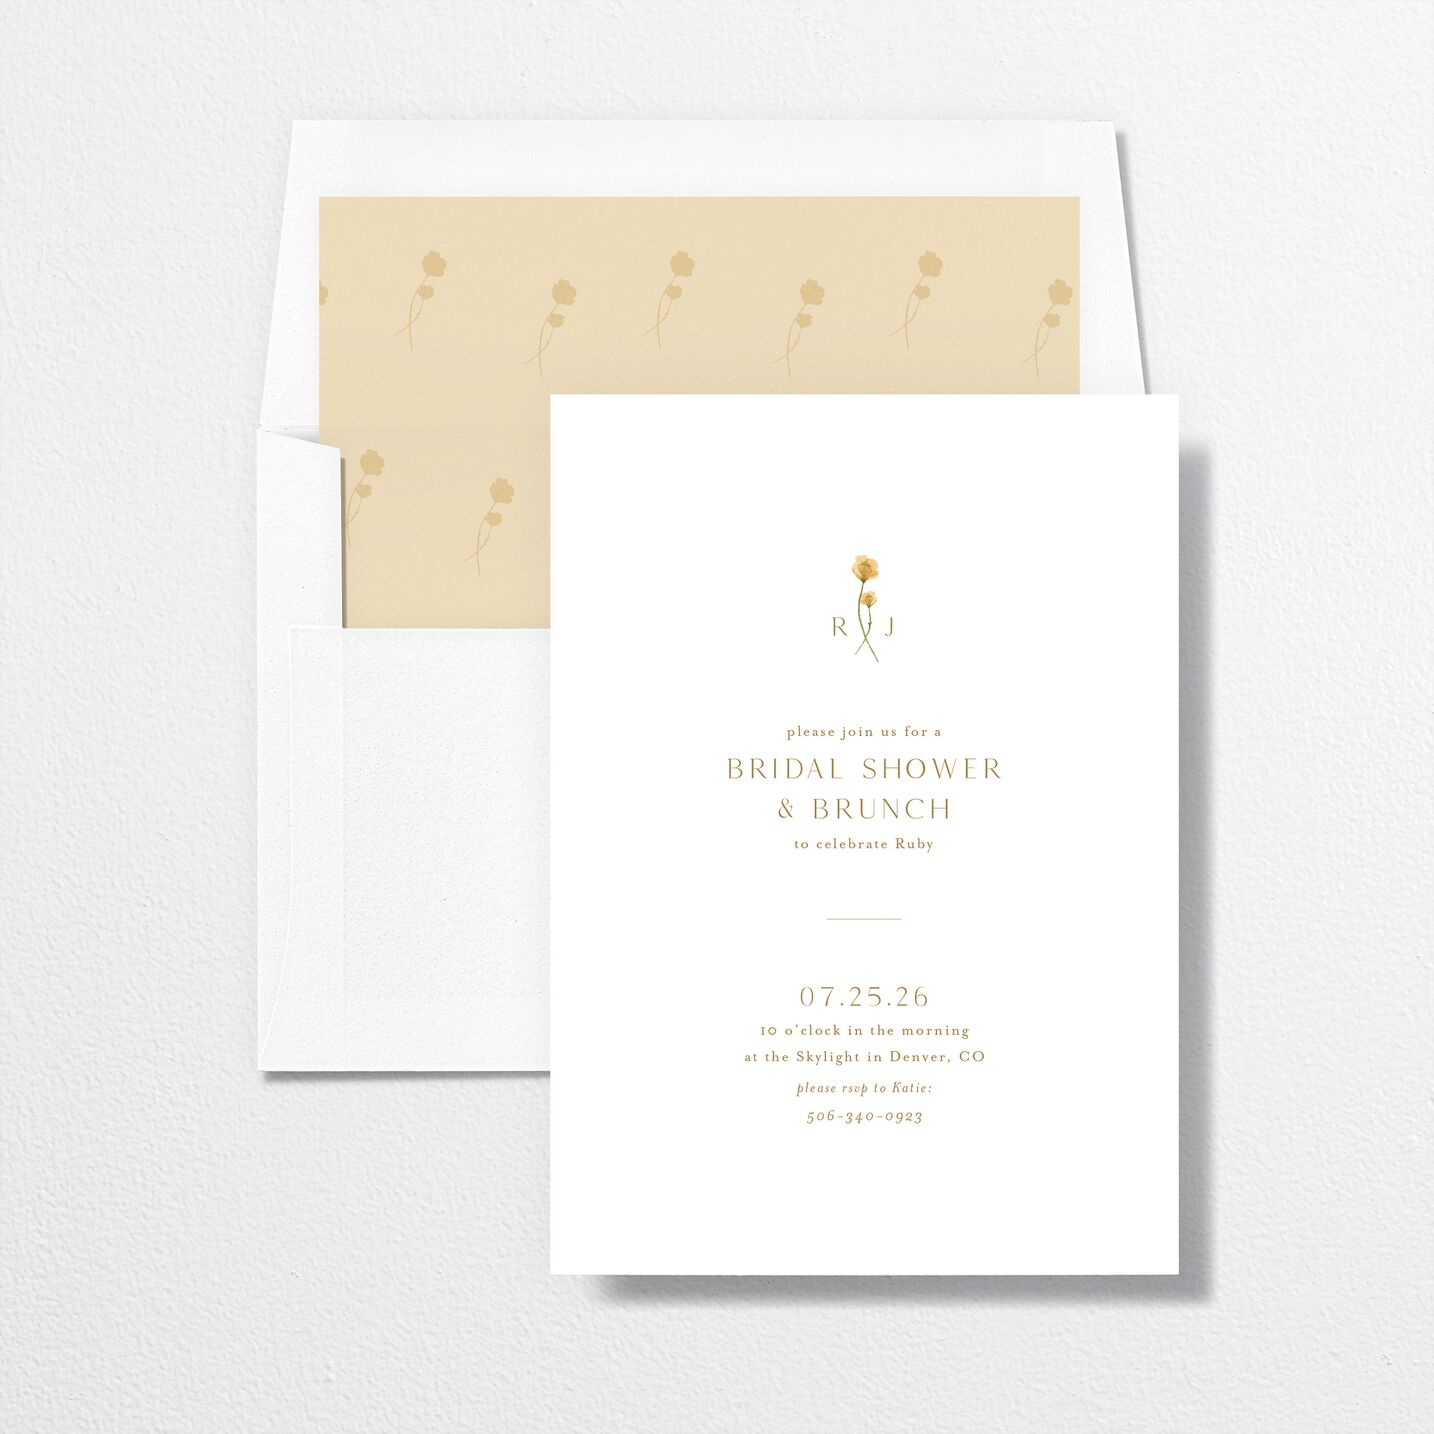 Dainty Monogram Bridal Shower Invitations envelope-and-liner in yellow